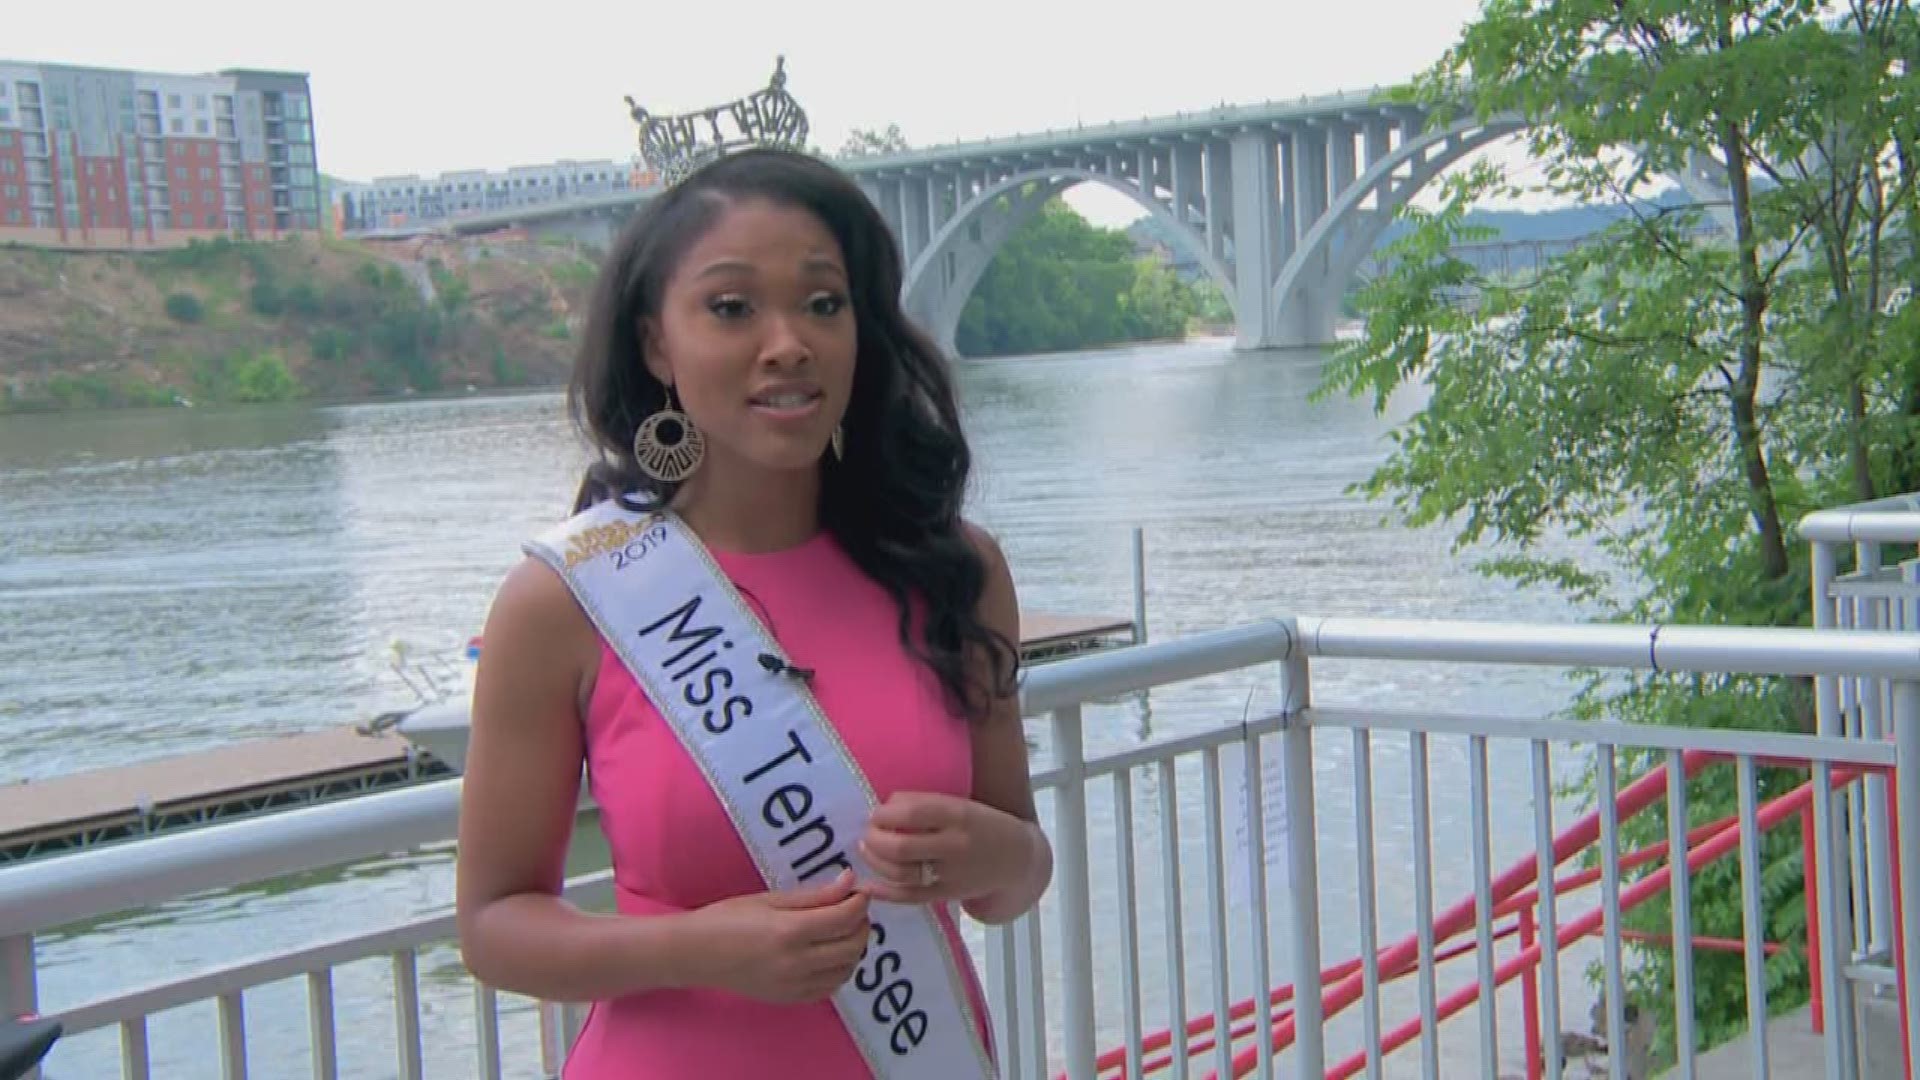 Miss Greene County Brianna Mason is now Miss Tennessee and she wants to inspire girls everywhere.